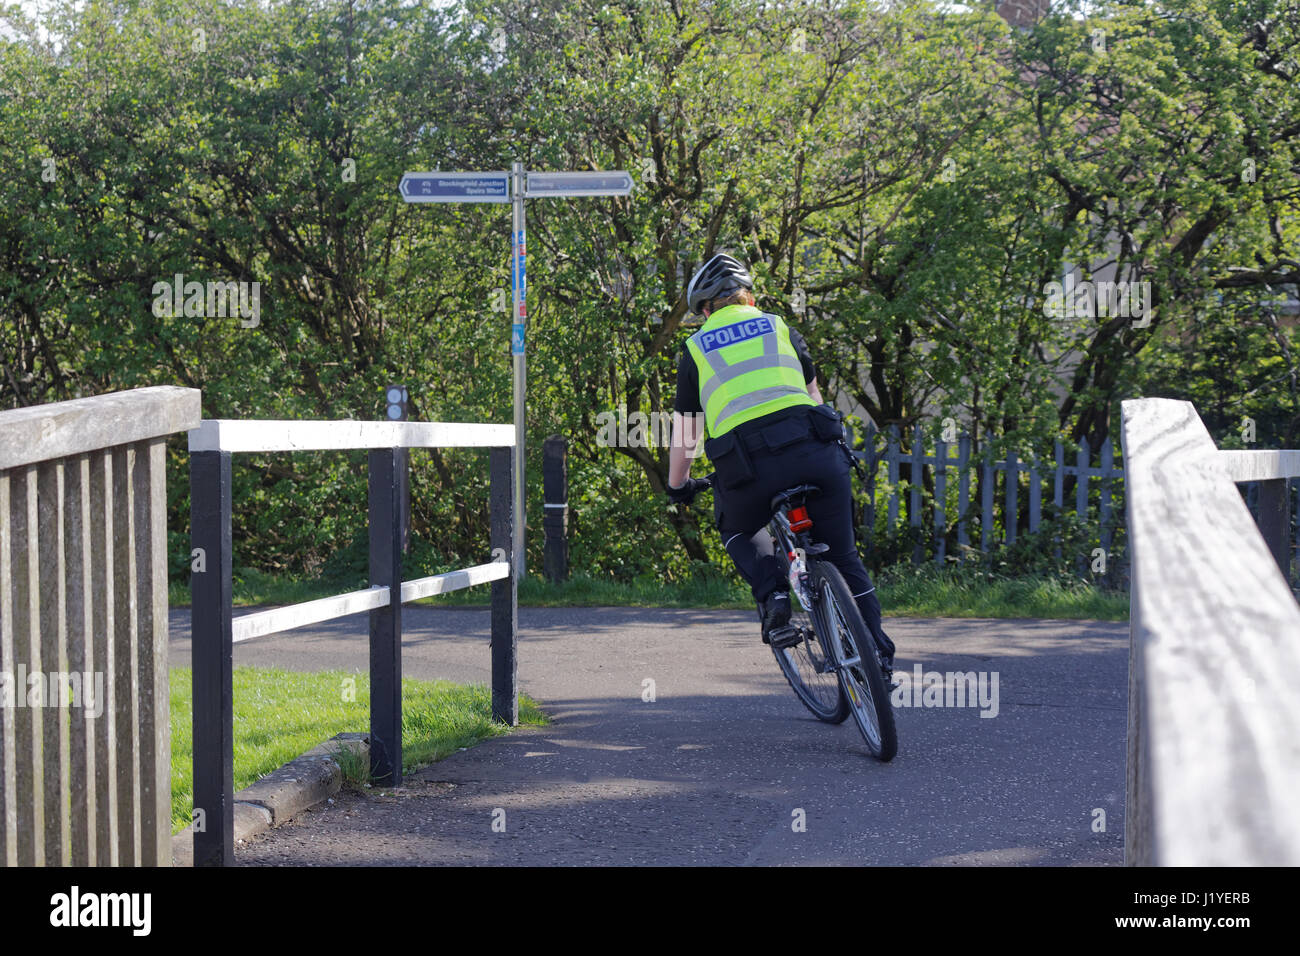 forth Clyde canal Scottish police man and woman on bicycle bike on the tow path Stock Photo